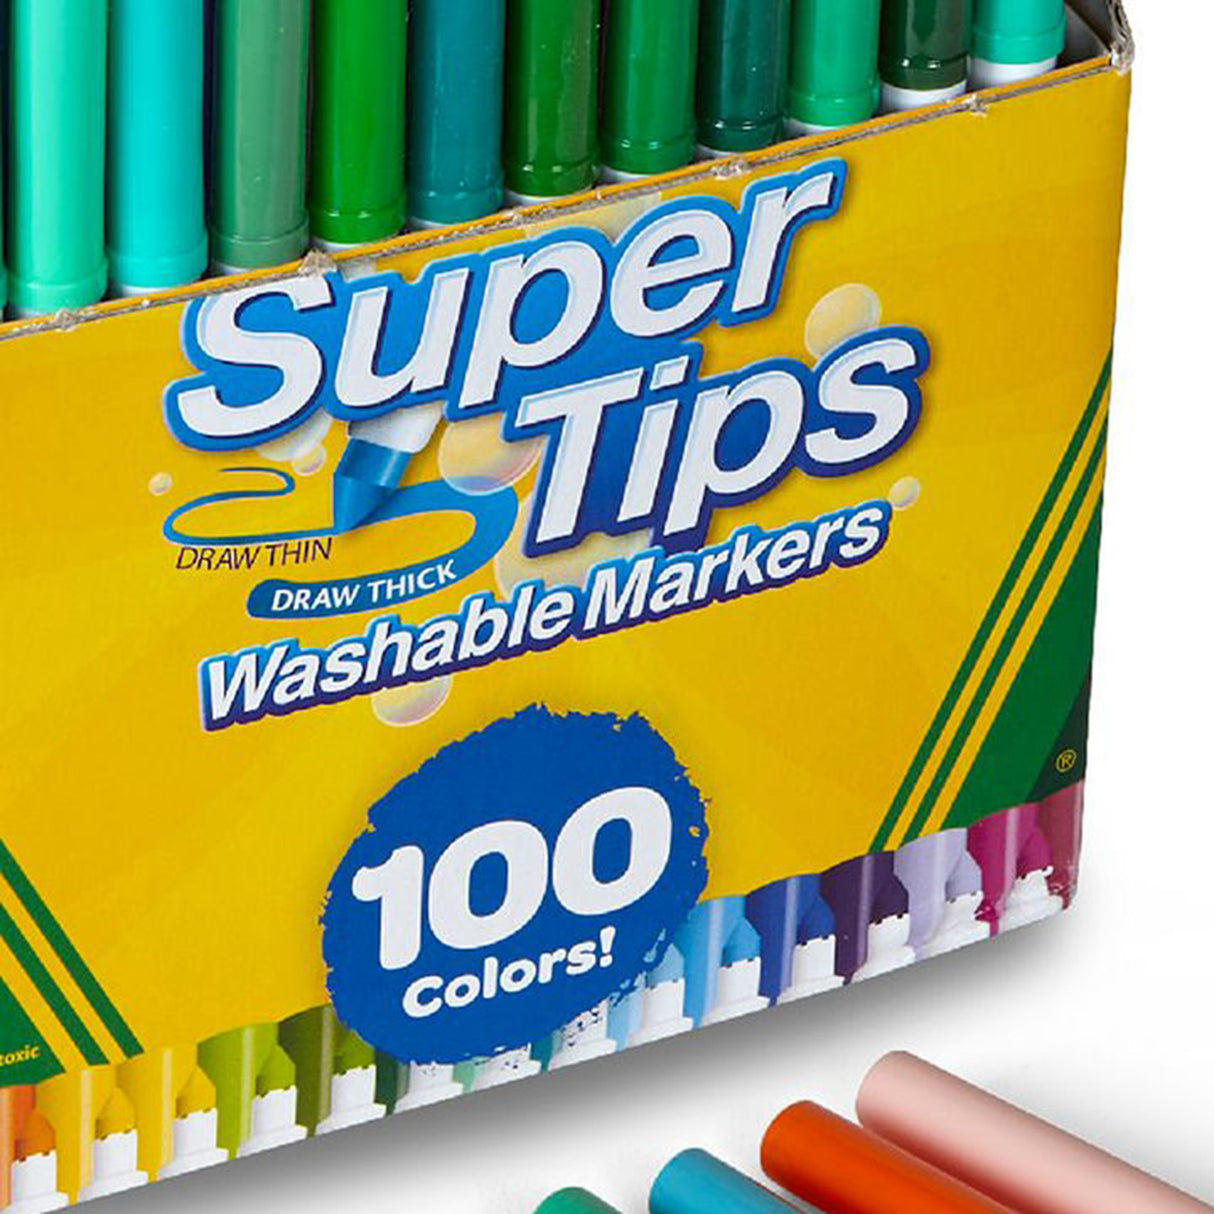 Crayola Super Tips Washable Markers (100 count)